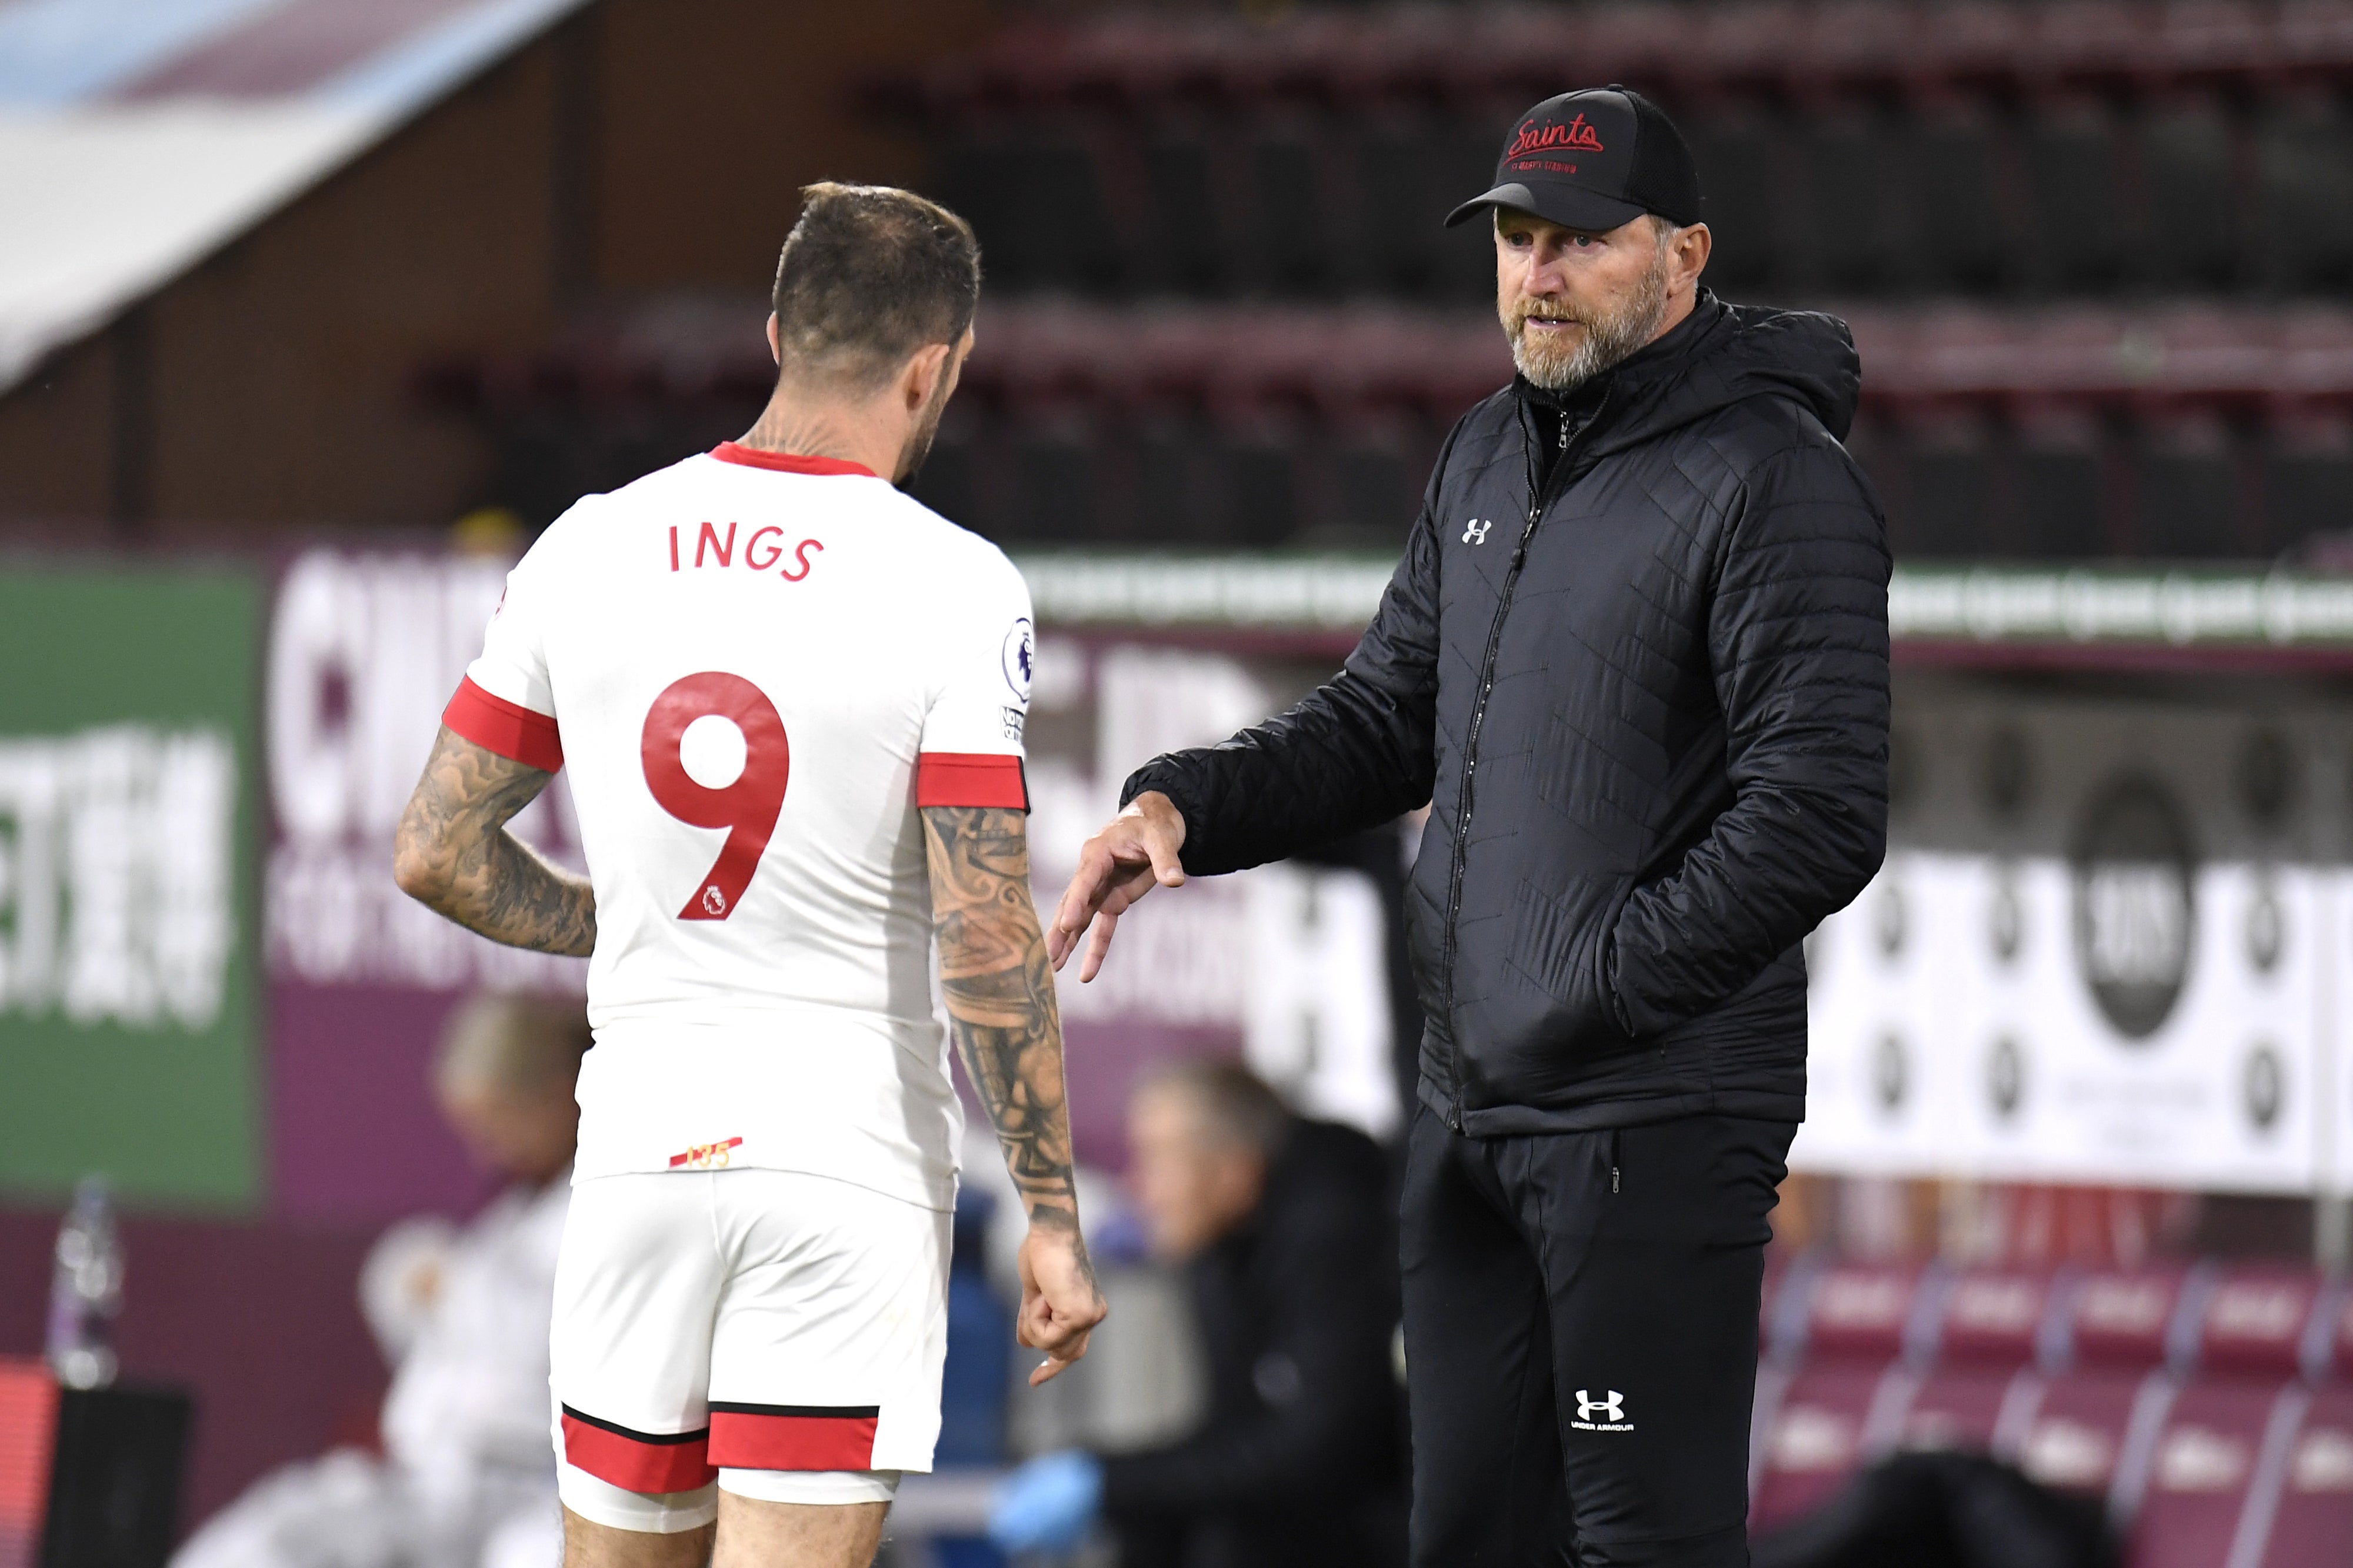 Southampton manager Ralph Hasenhuttl saw striker Danny Ings join Aston Villa in a £30million deal during the summer